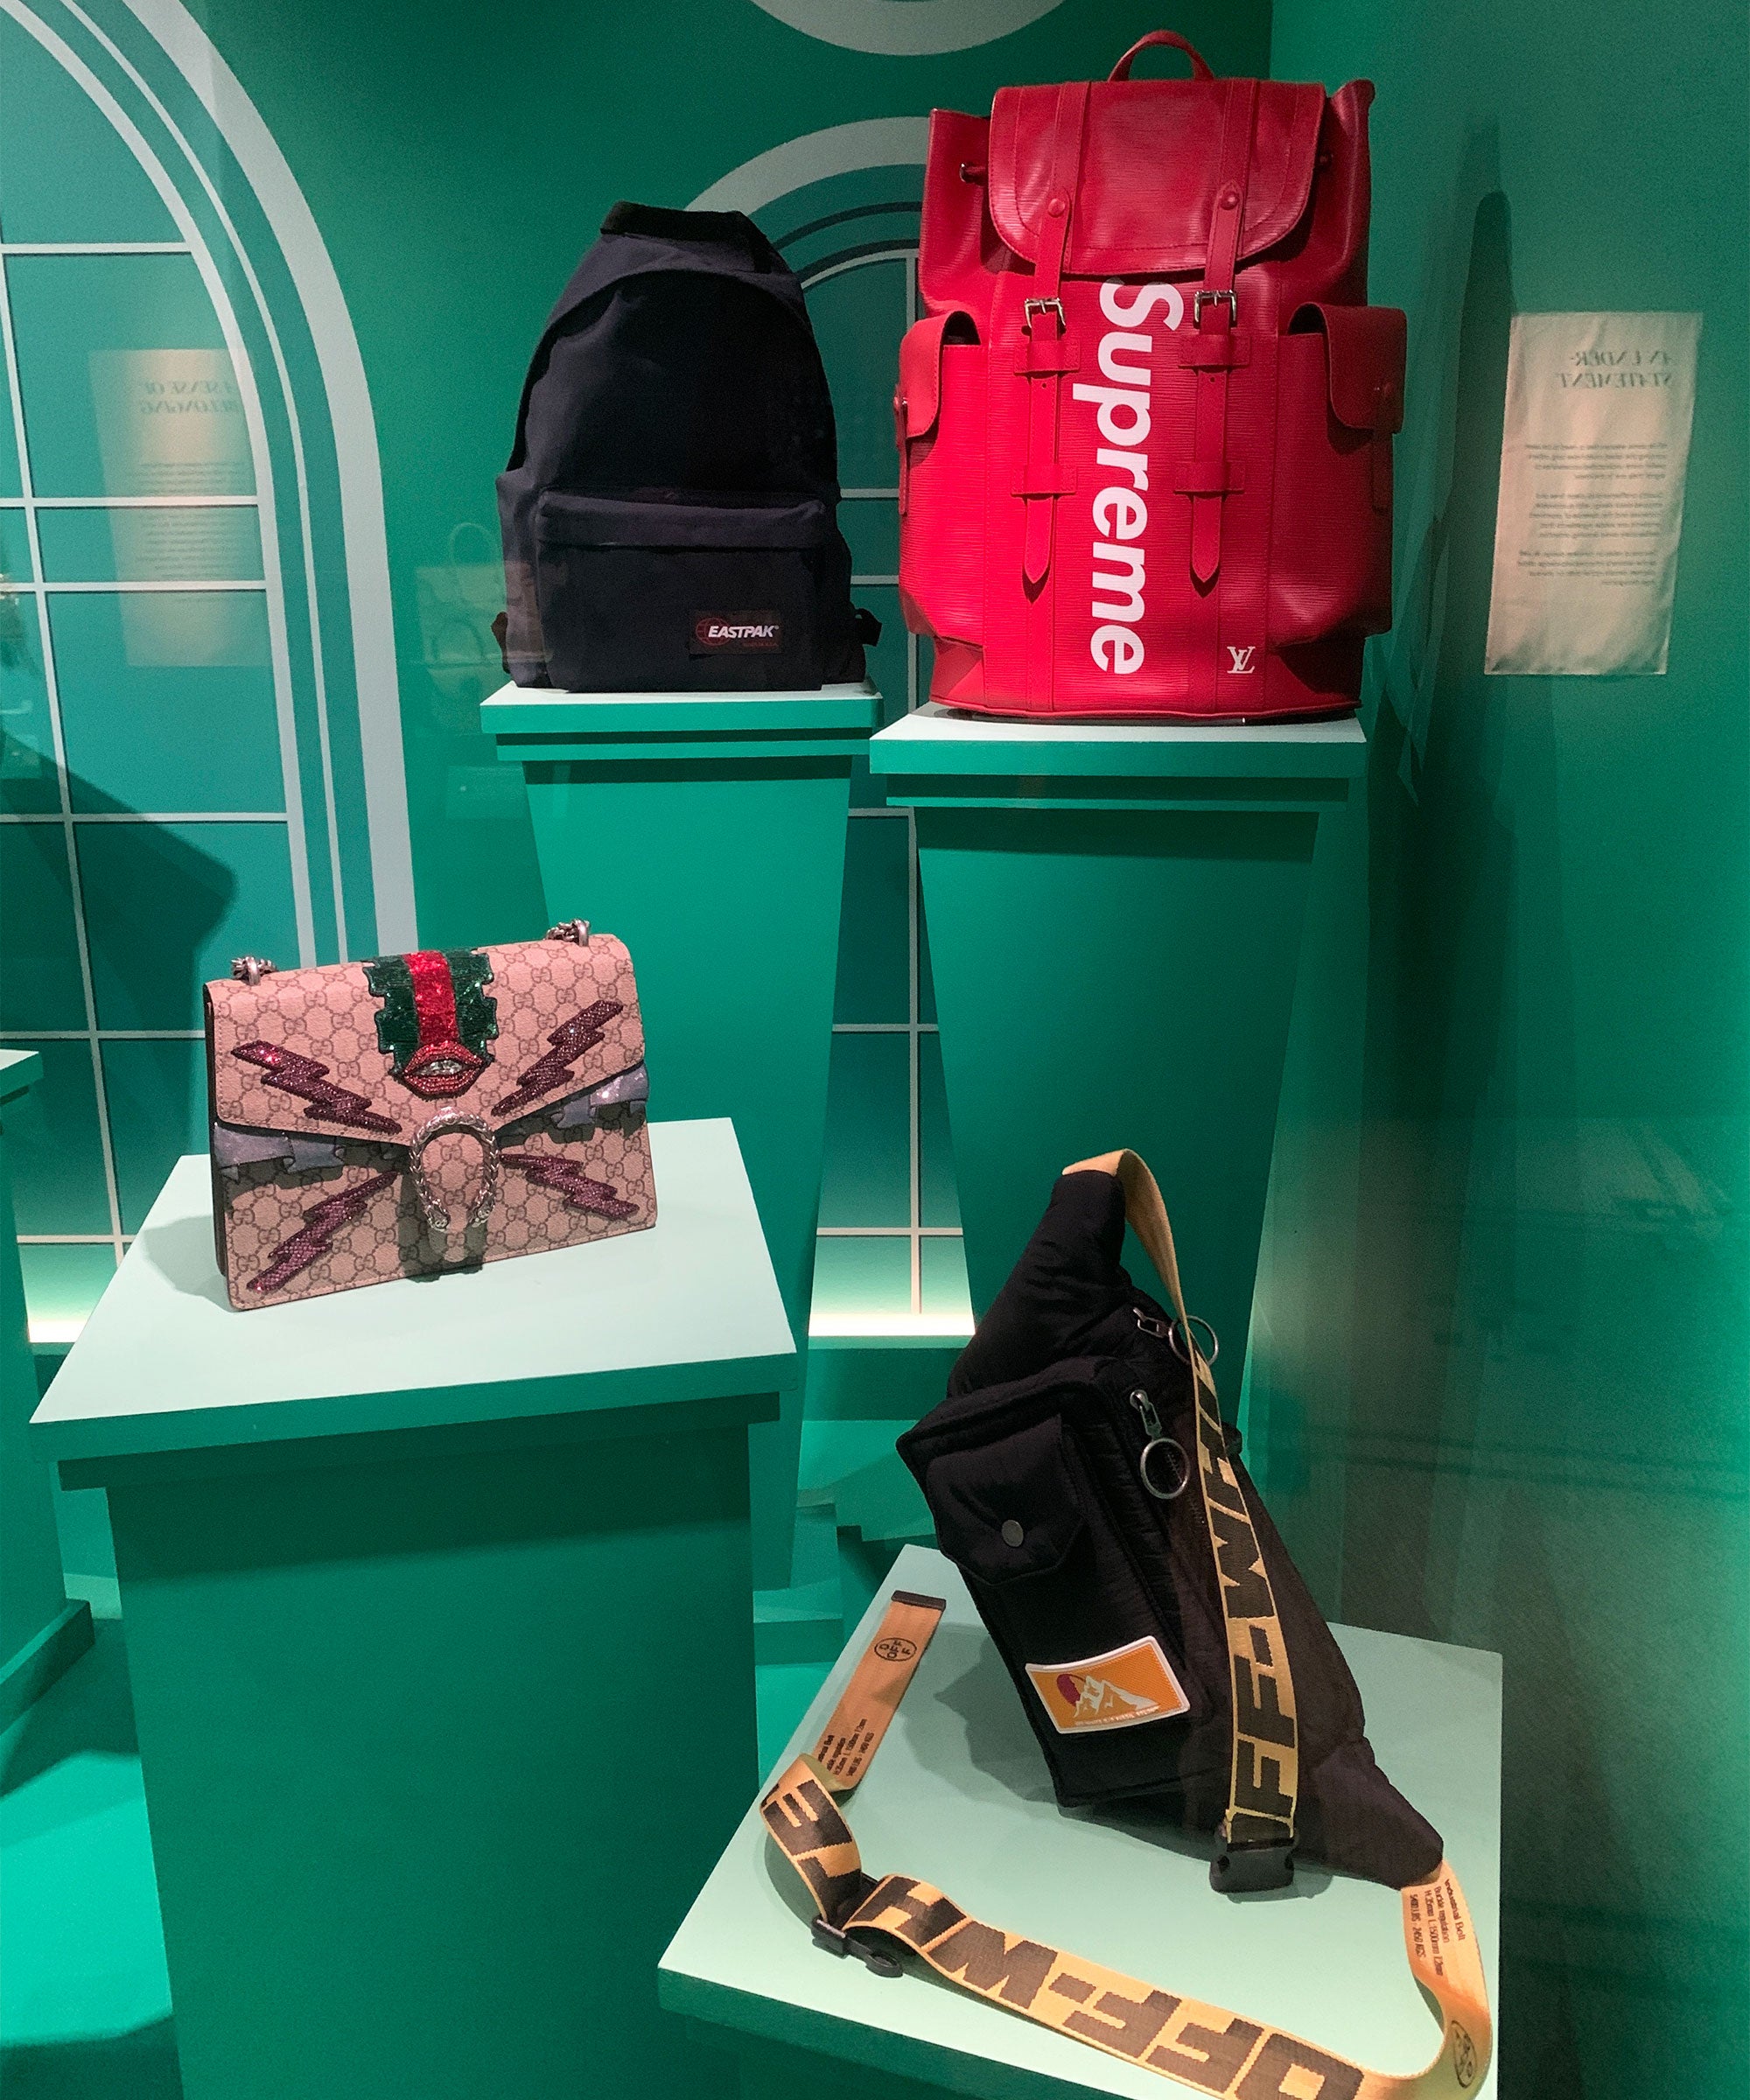 About the Bags: Inside Out exhibition · V&A